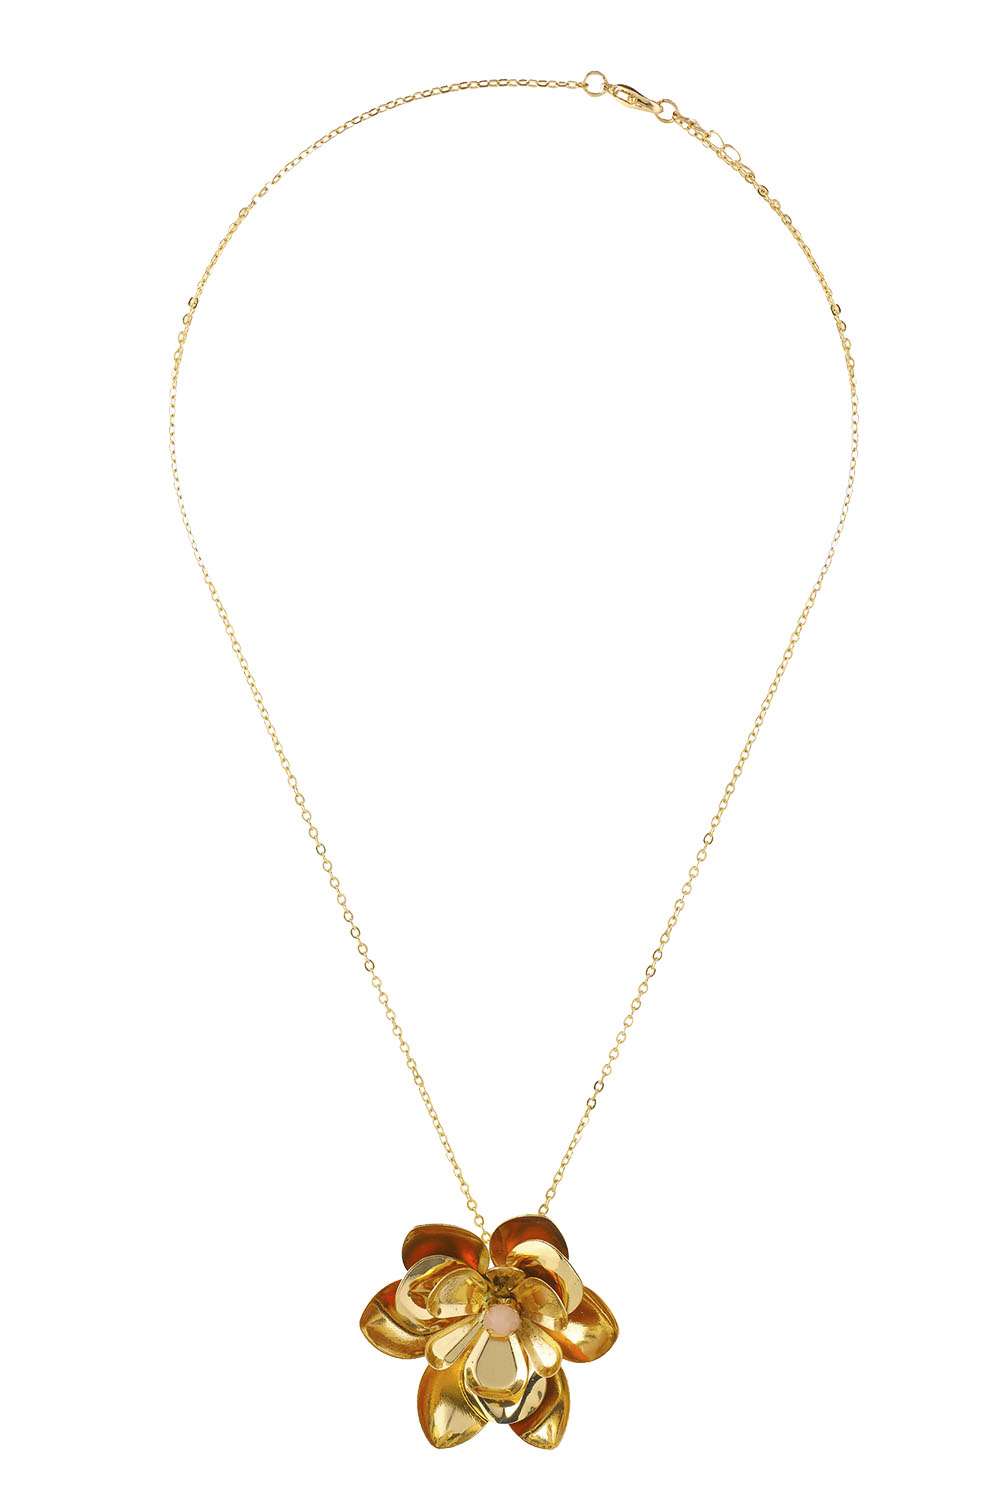 Necklace, $29, by Ruby.